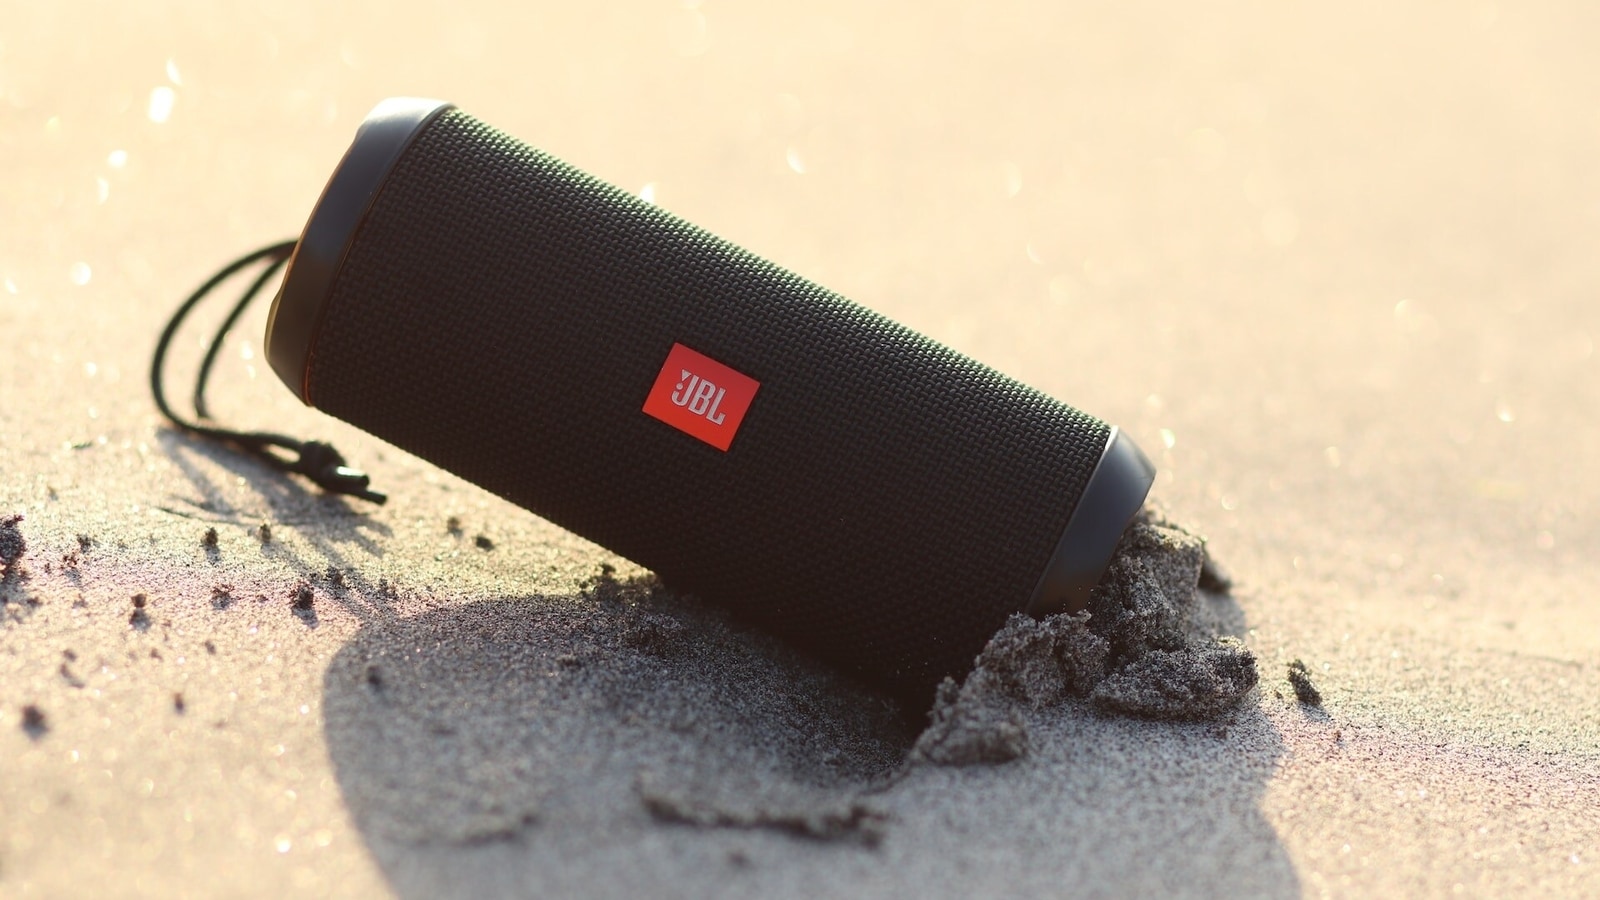  JBL Flip 4, Black - Waterproof, Portable & Durable Bluetooth  Speaker - Up to 12 Hours of Wireless Streaming - Includes Noise-Cancelling  Speakerphone, Voice Assistant & JBL Connect+ : Electronics